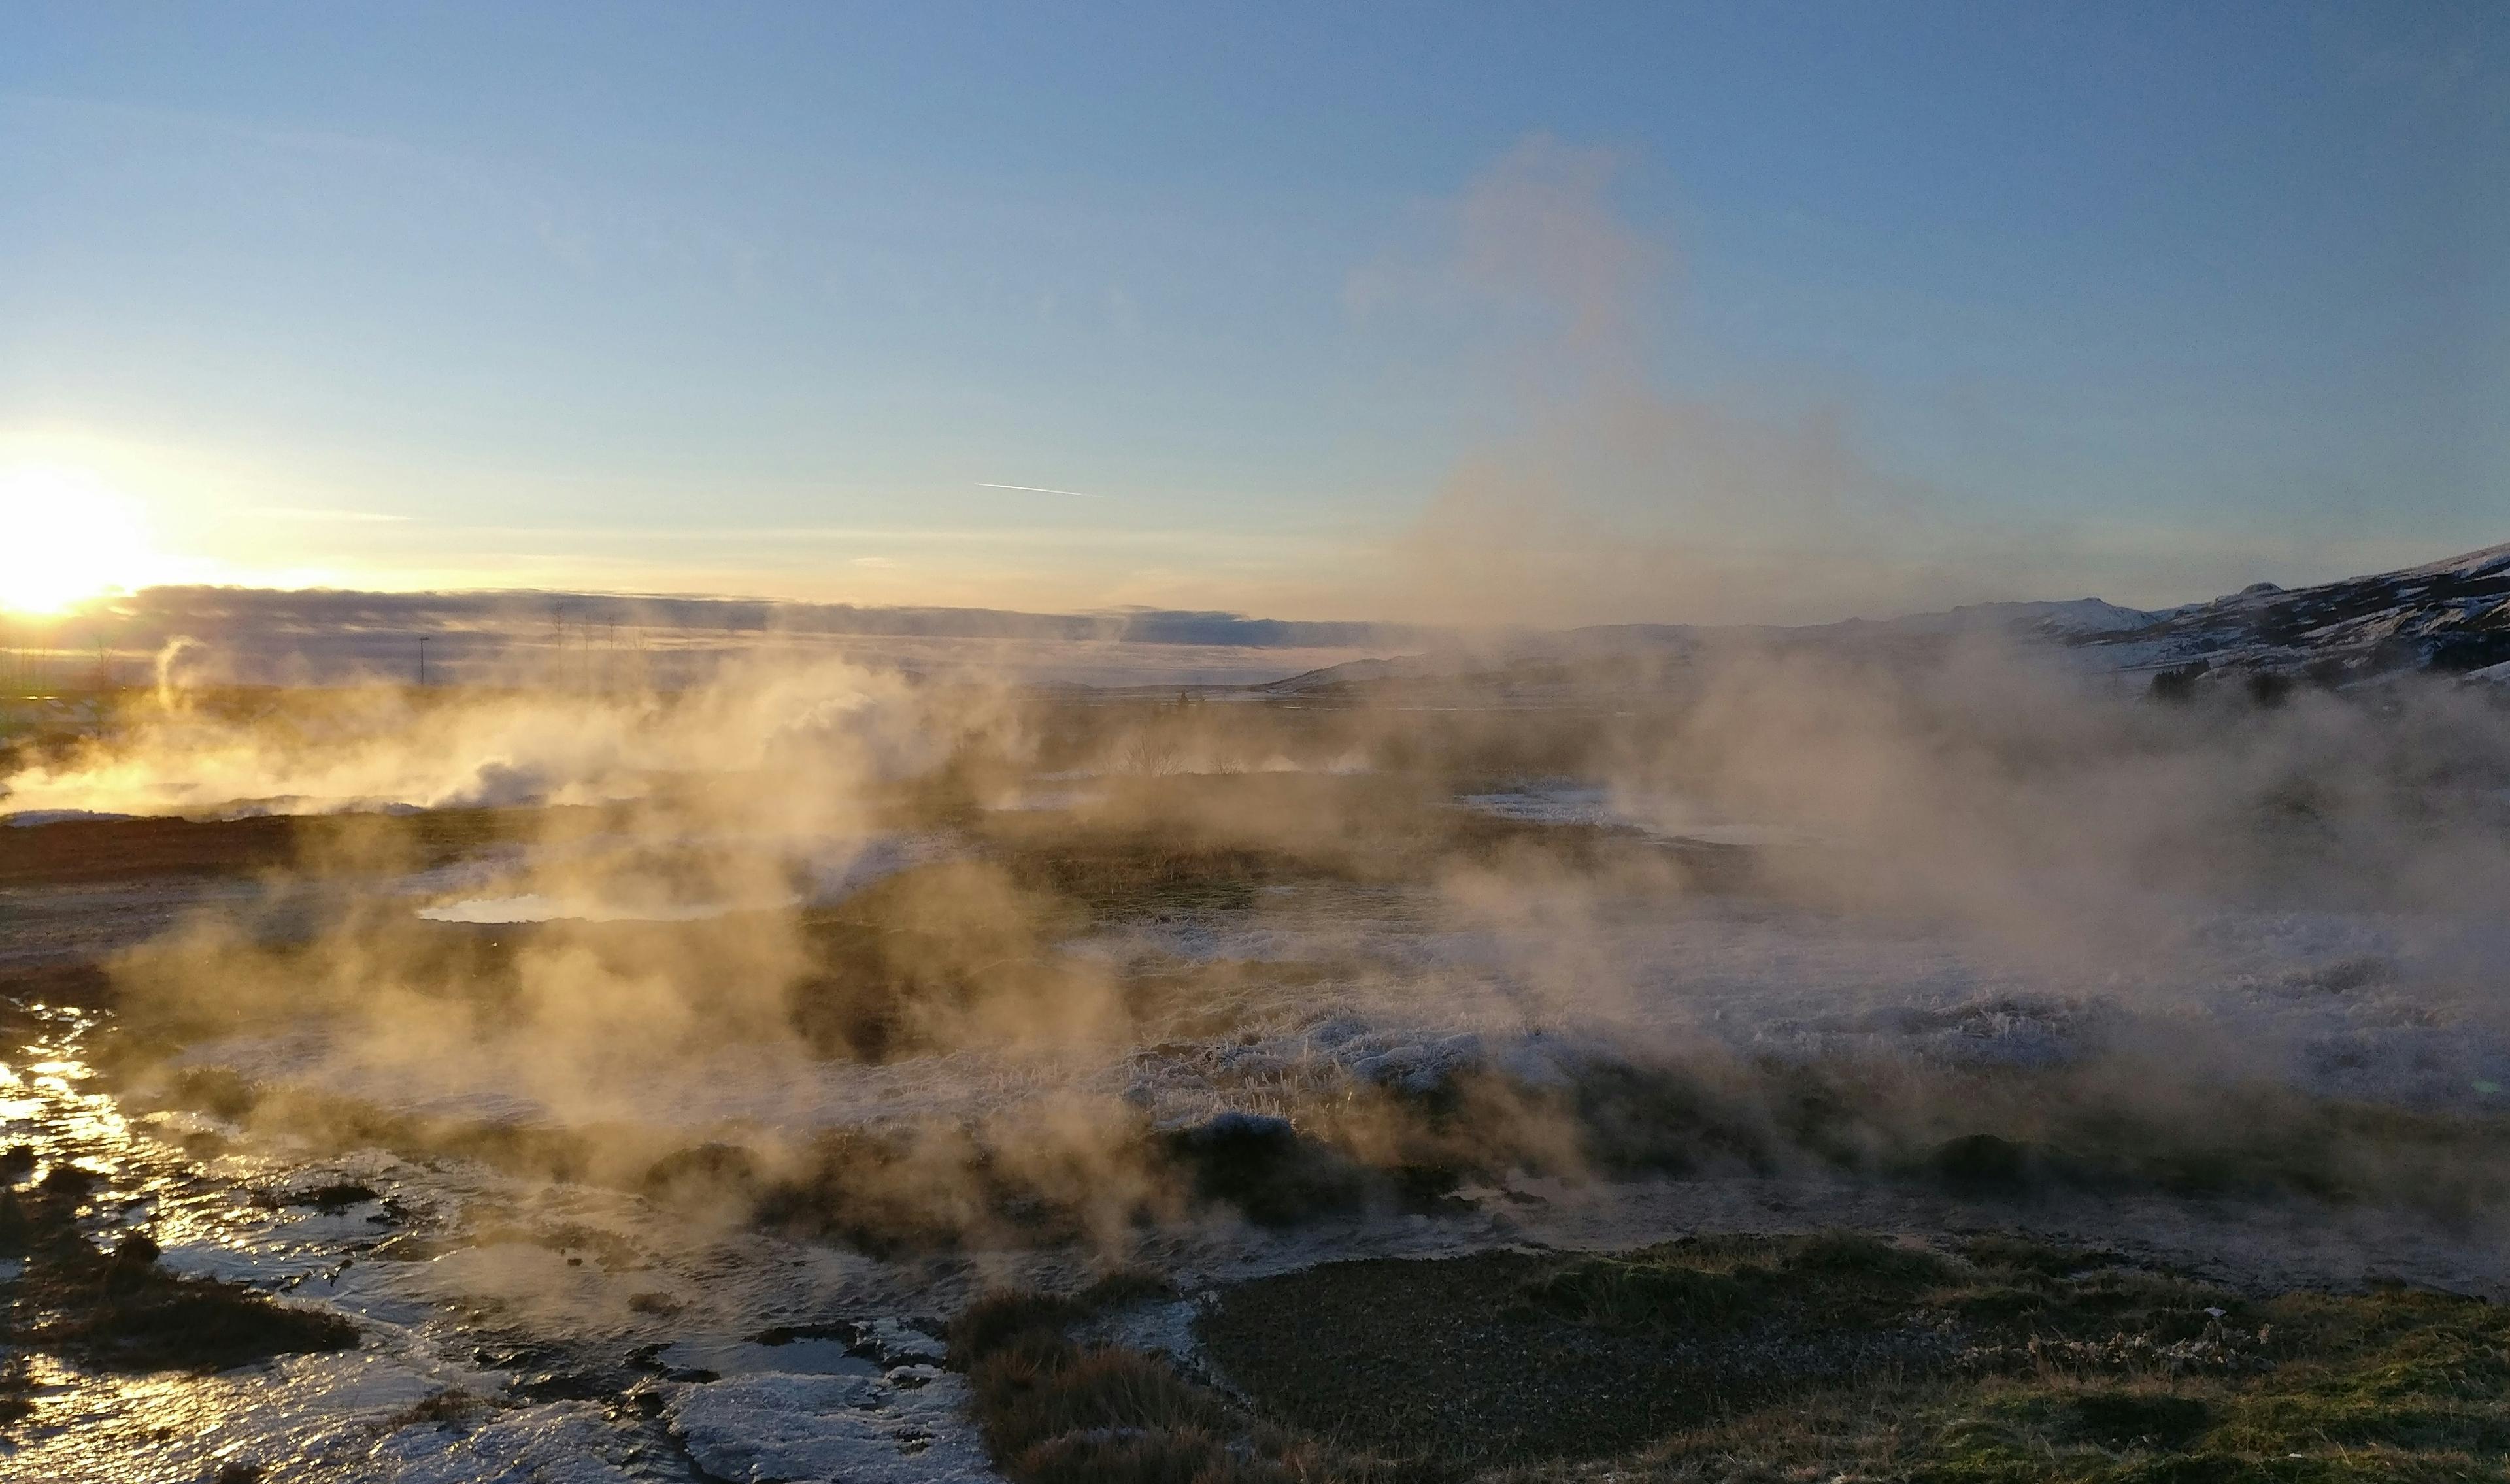 A steamy geothermal landscape captured at sunrise or sunset, with the warm glow of the sun highlighting the steam and rugged terrain, evoking the geothermal activity of areas like those found in Iceland.